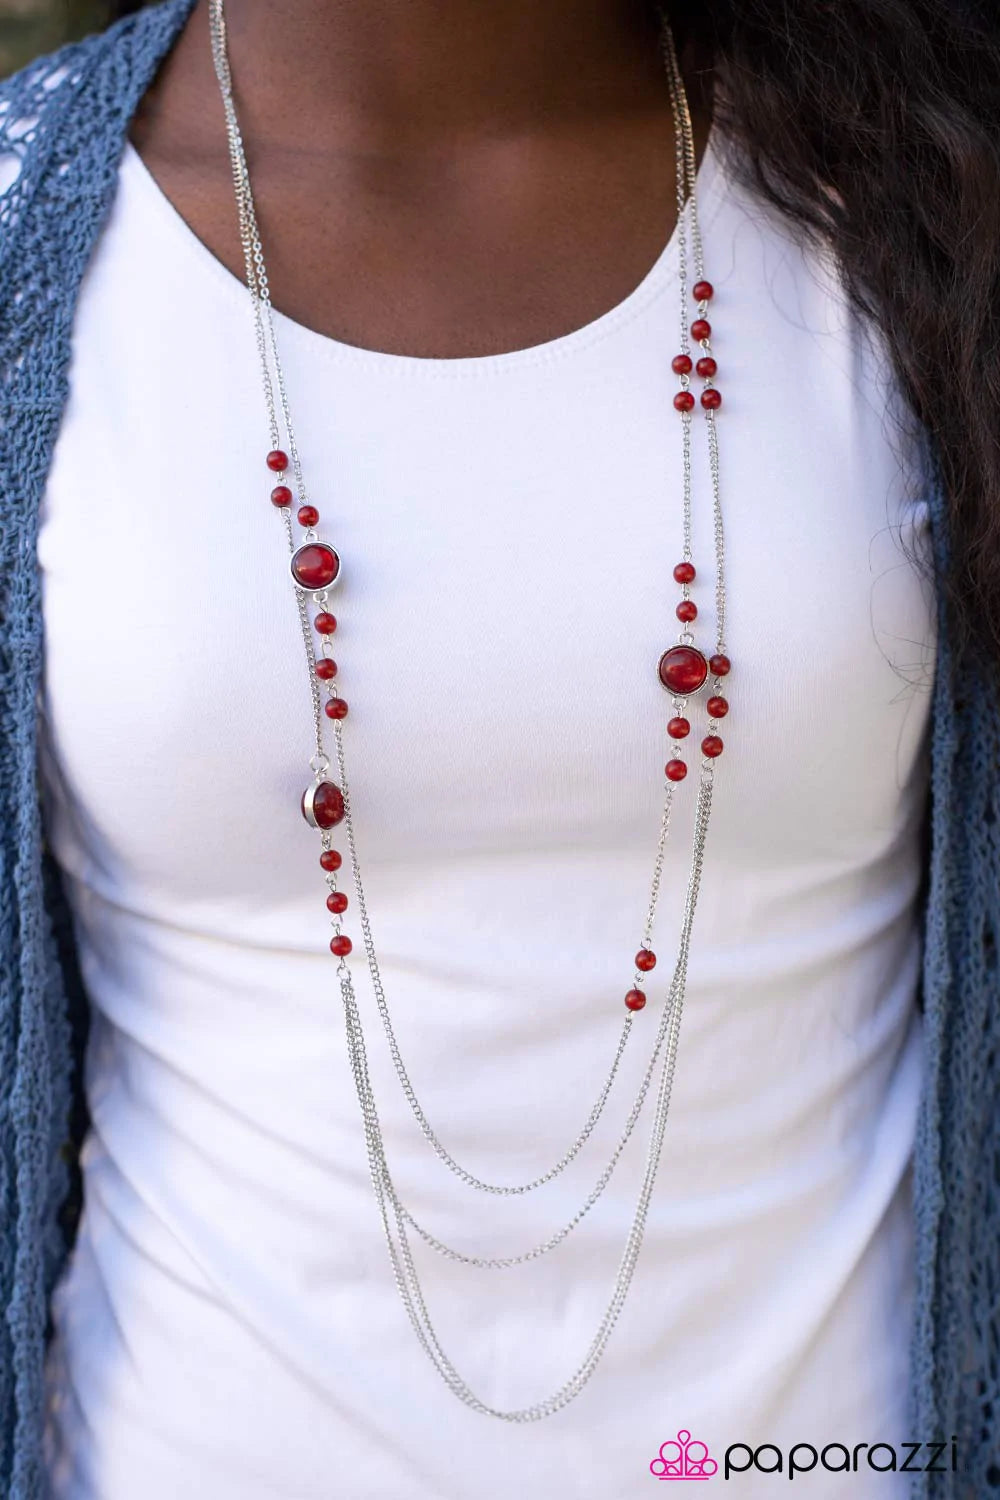 Paparazzi Necklace ~ Wide Open Skies - Red